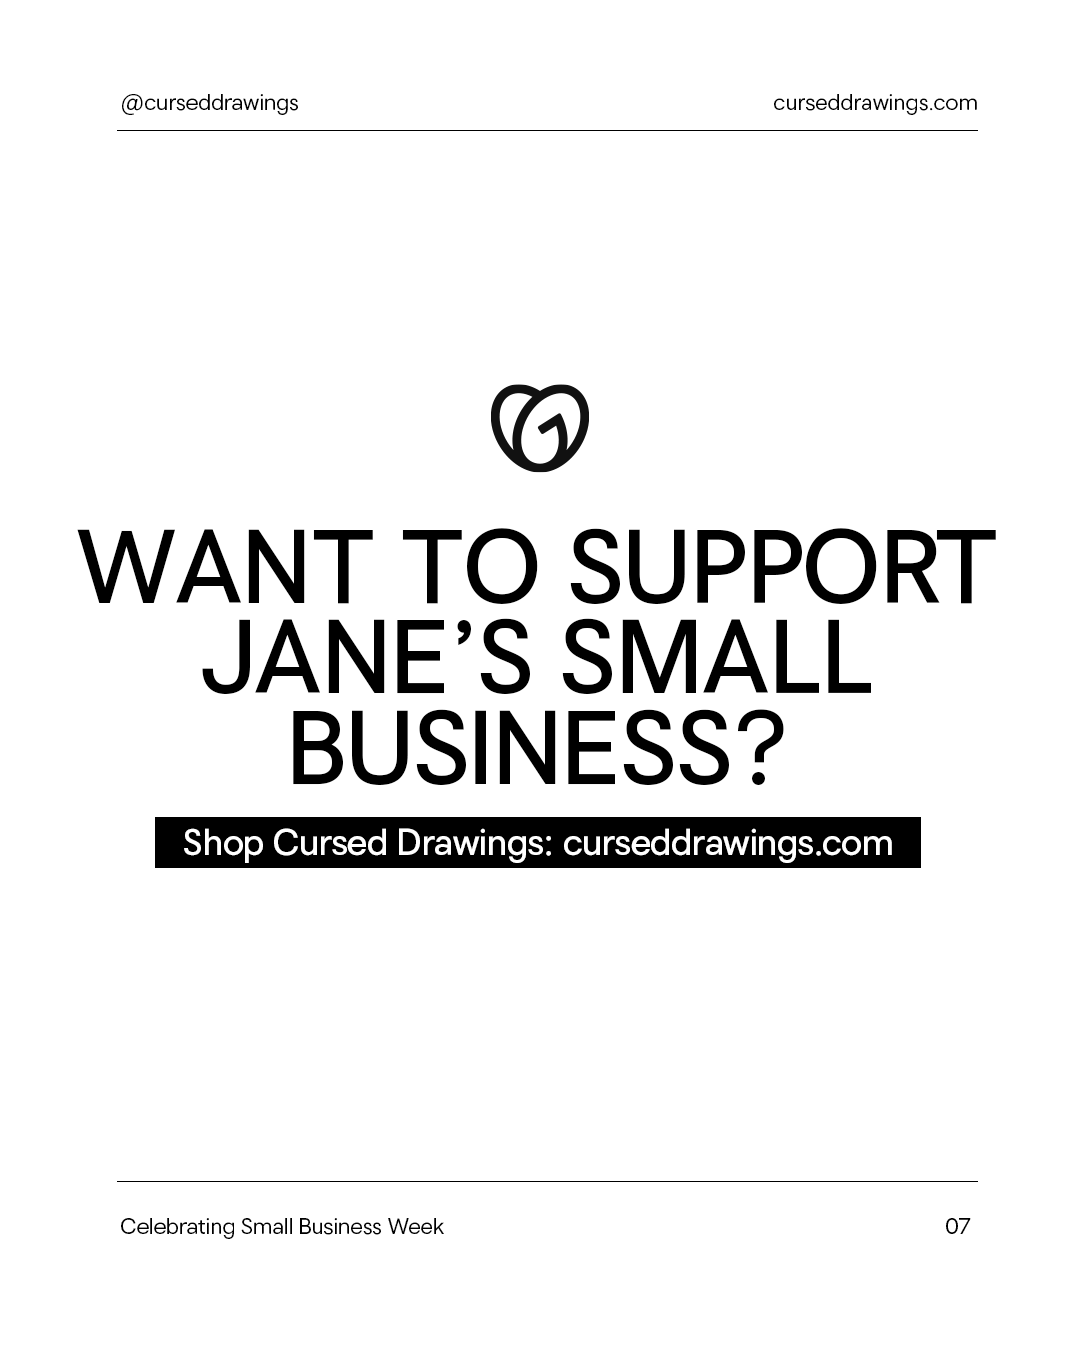 Want to support Jane's small business?